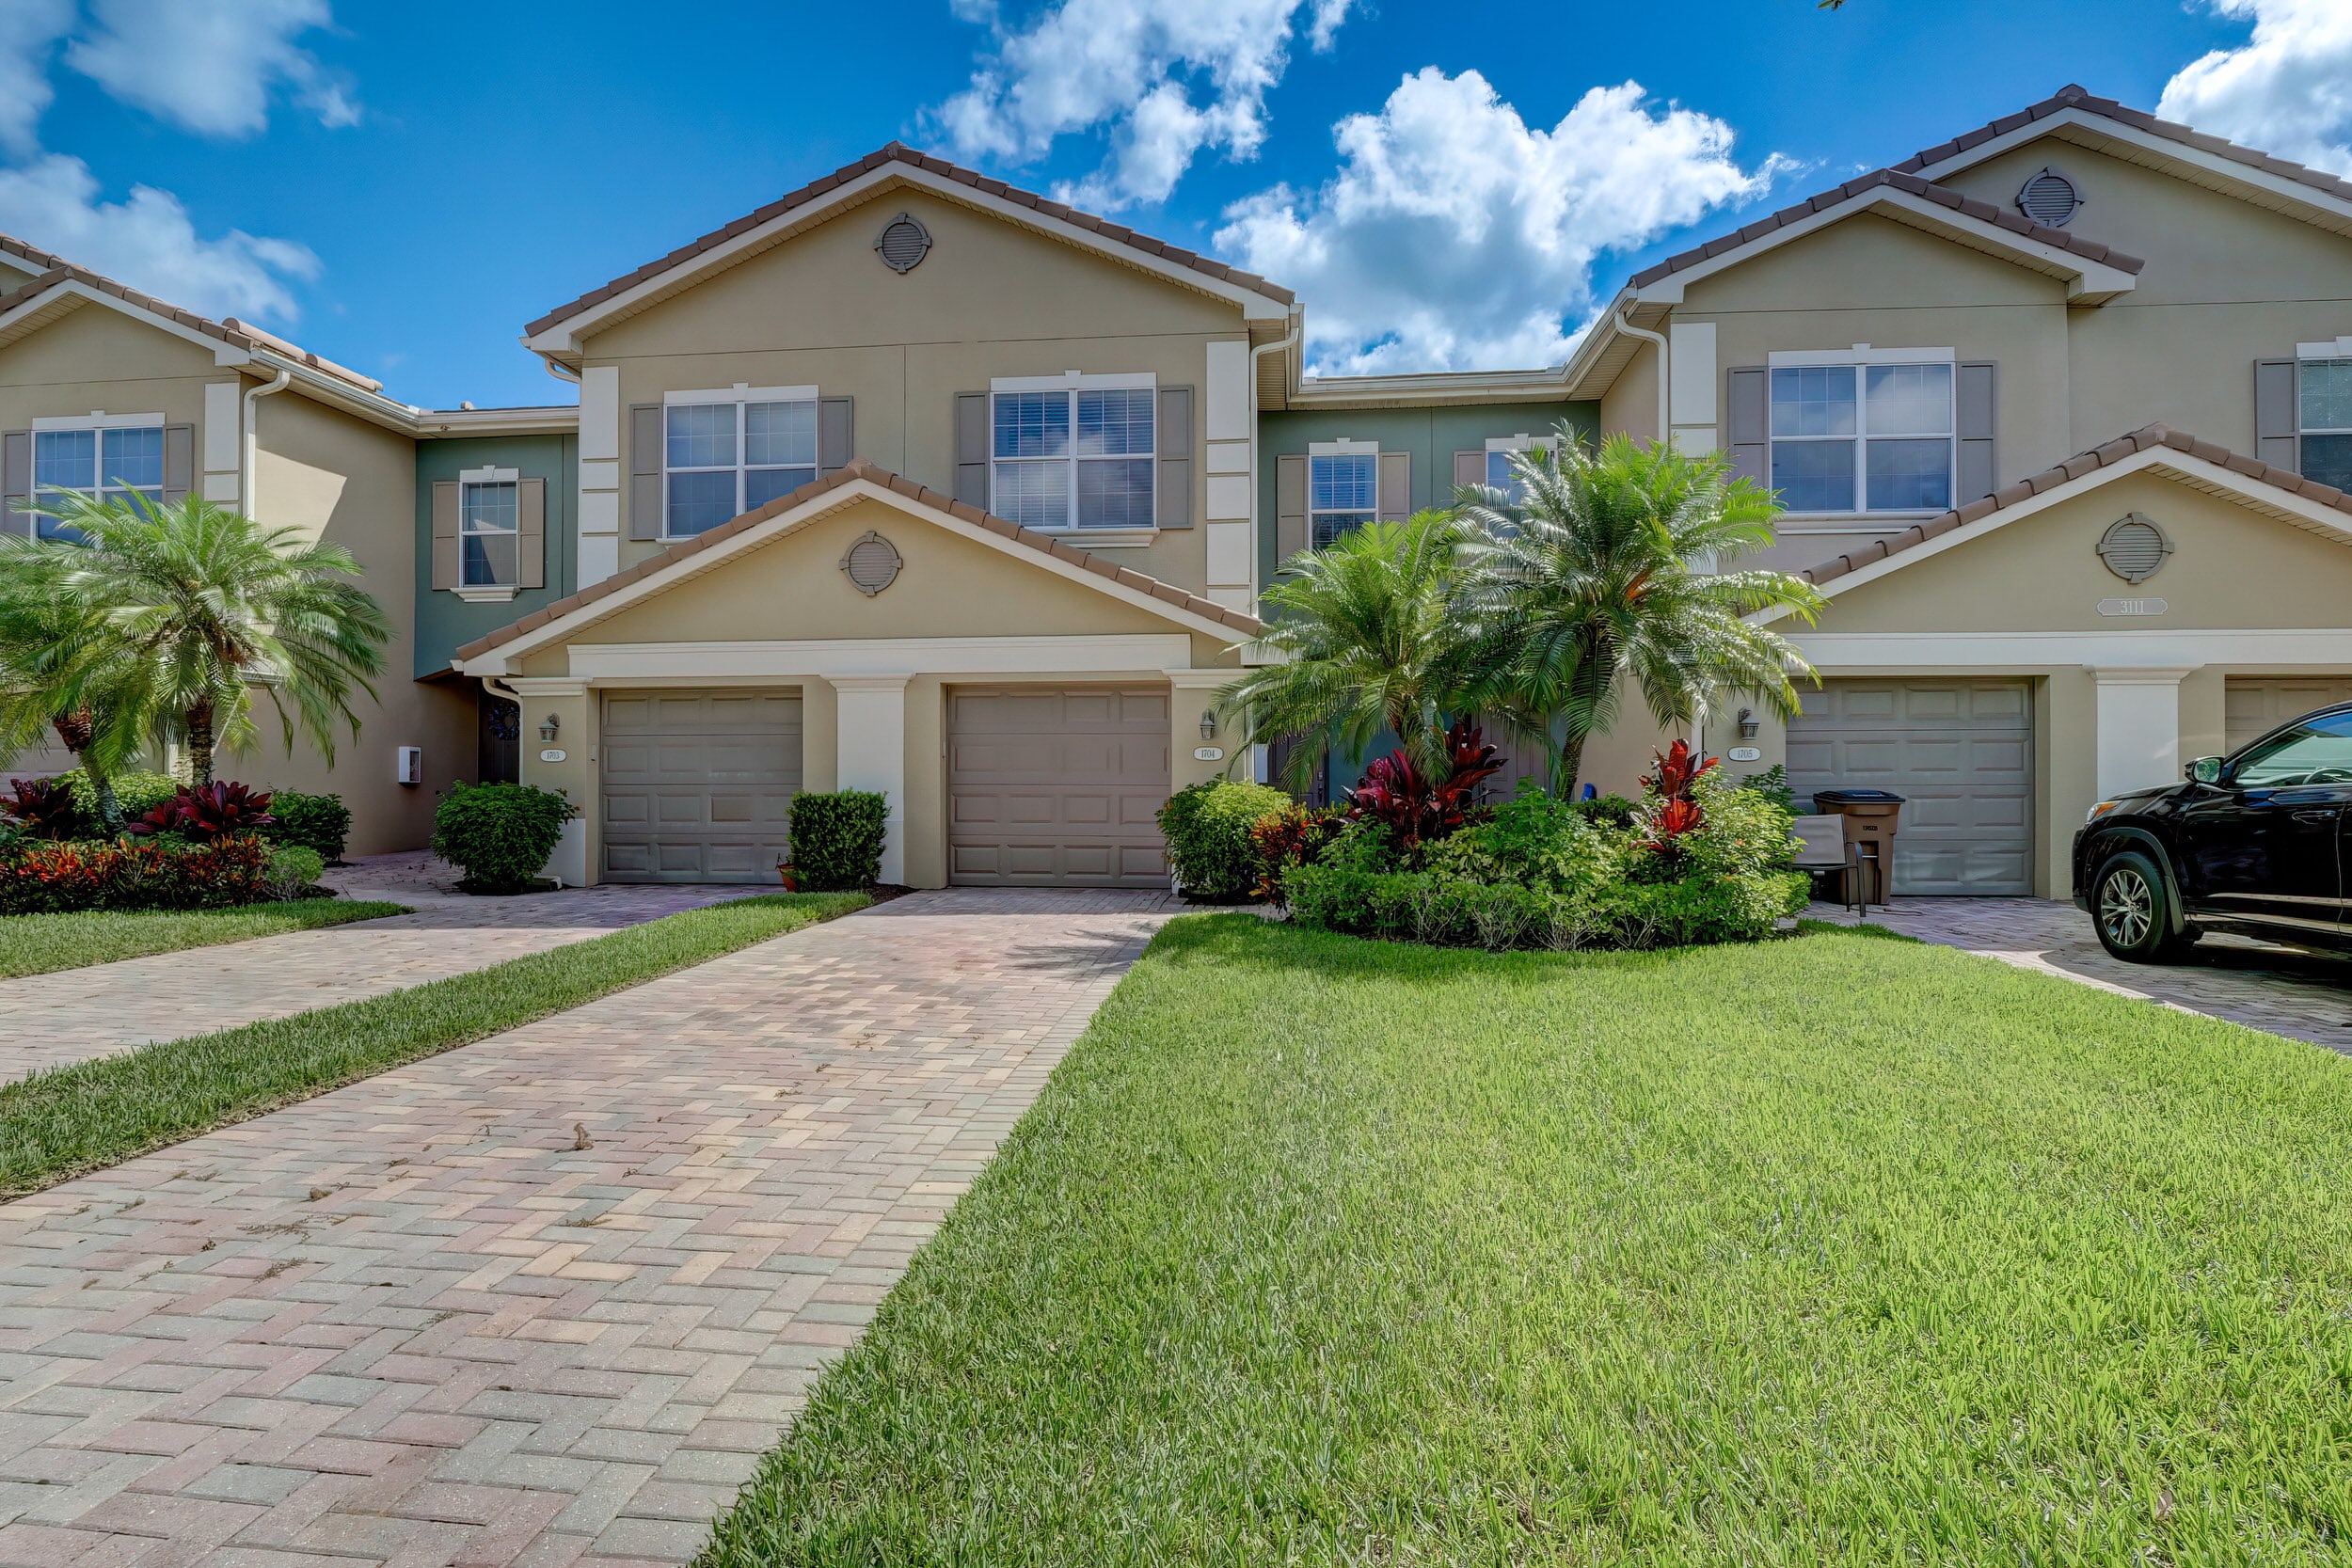 Welcome to 3111 Cottonwood Bend #1704 Managed by SW Florida Based Mike Z Rentals LLC